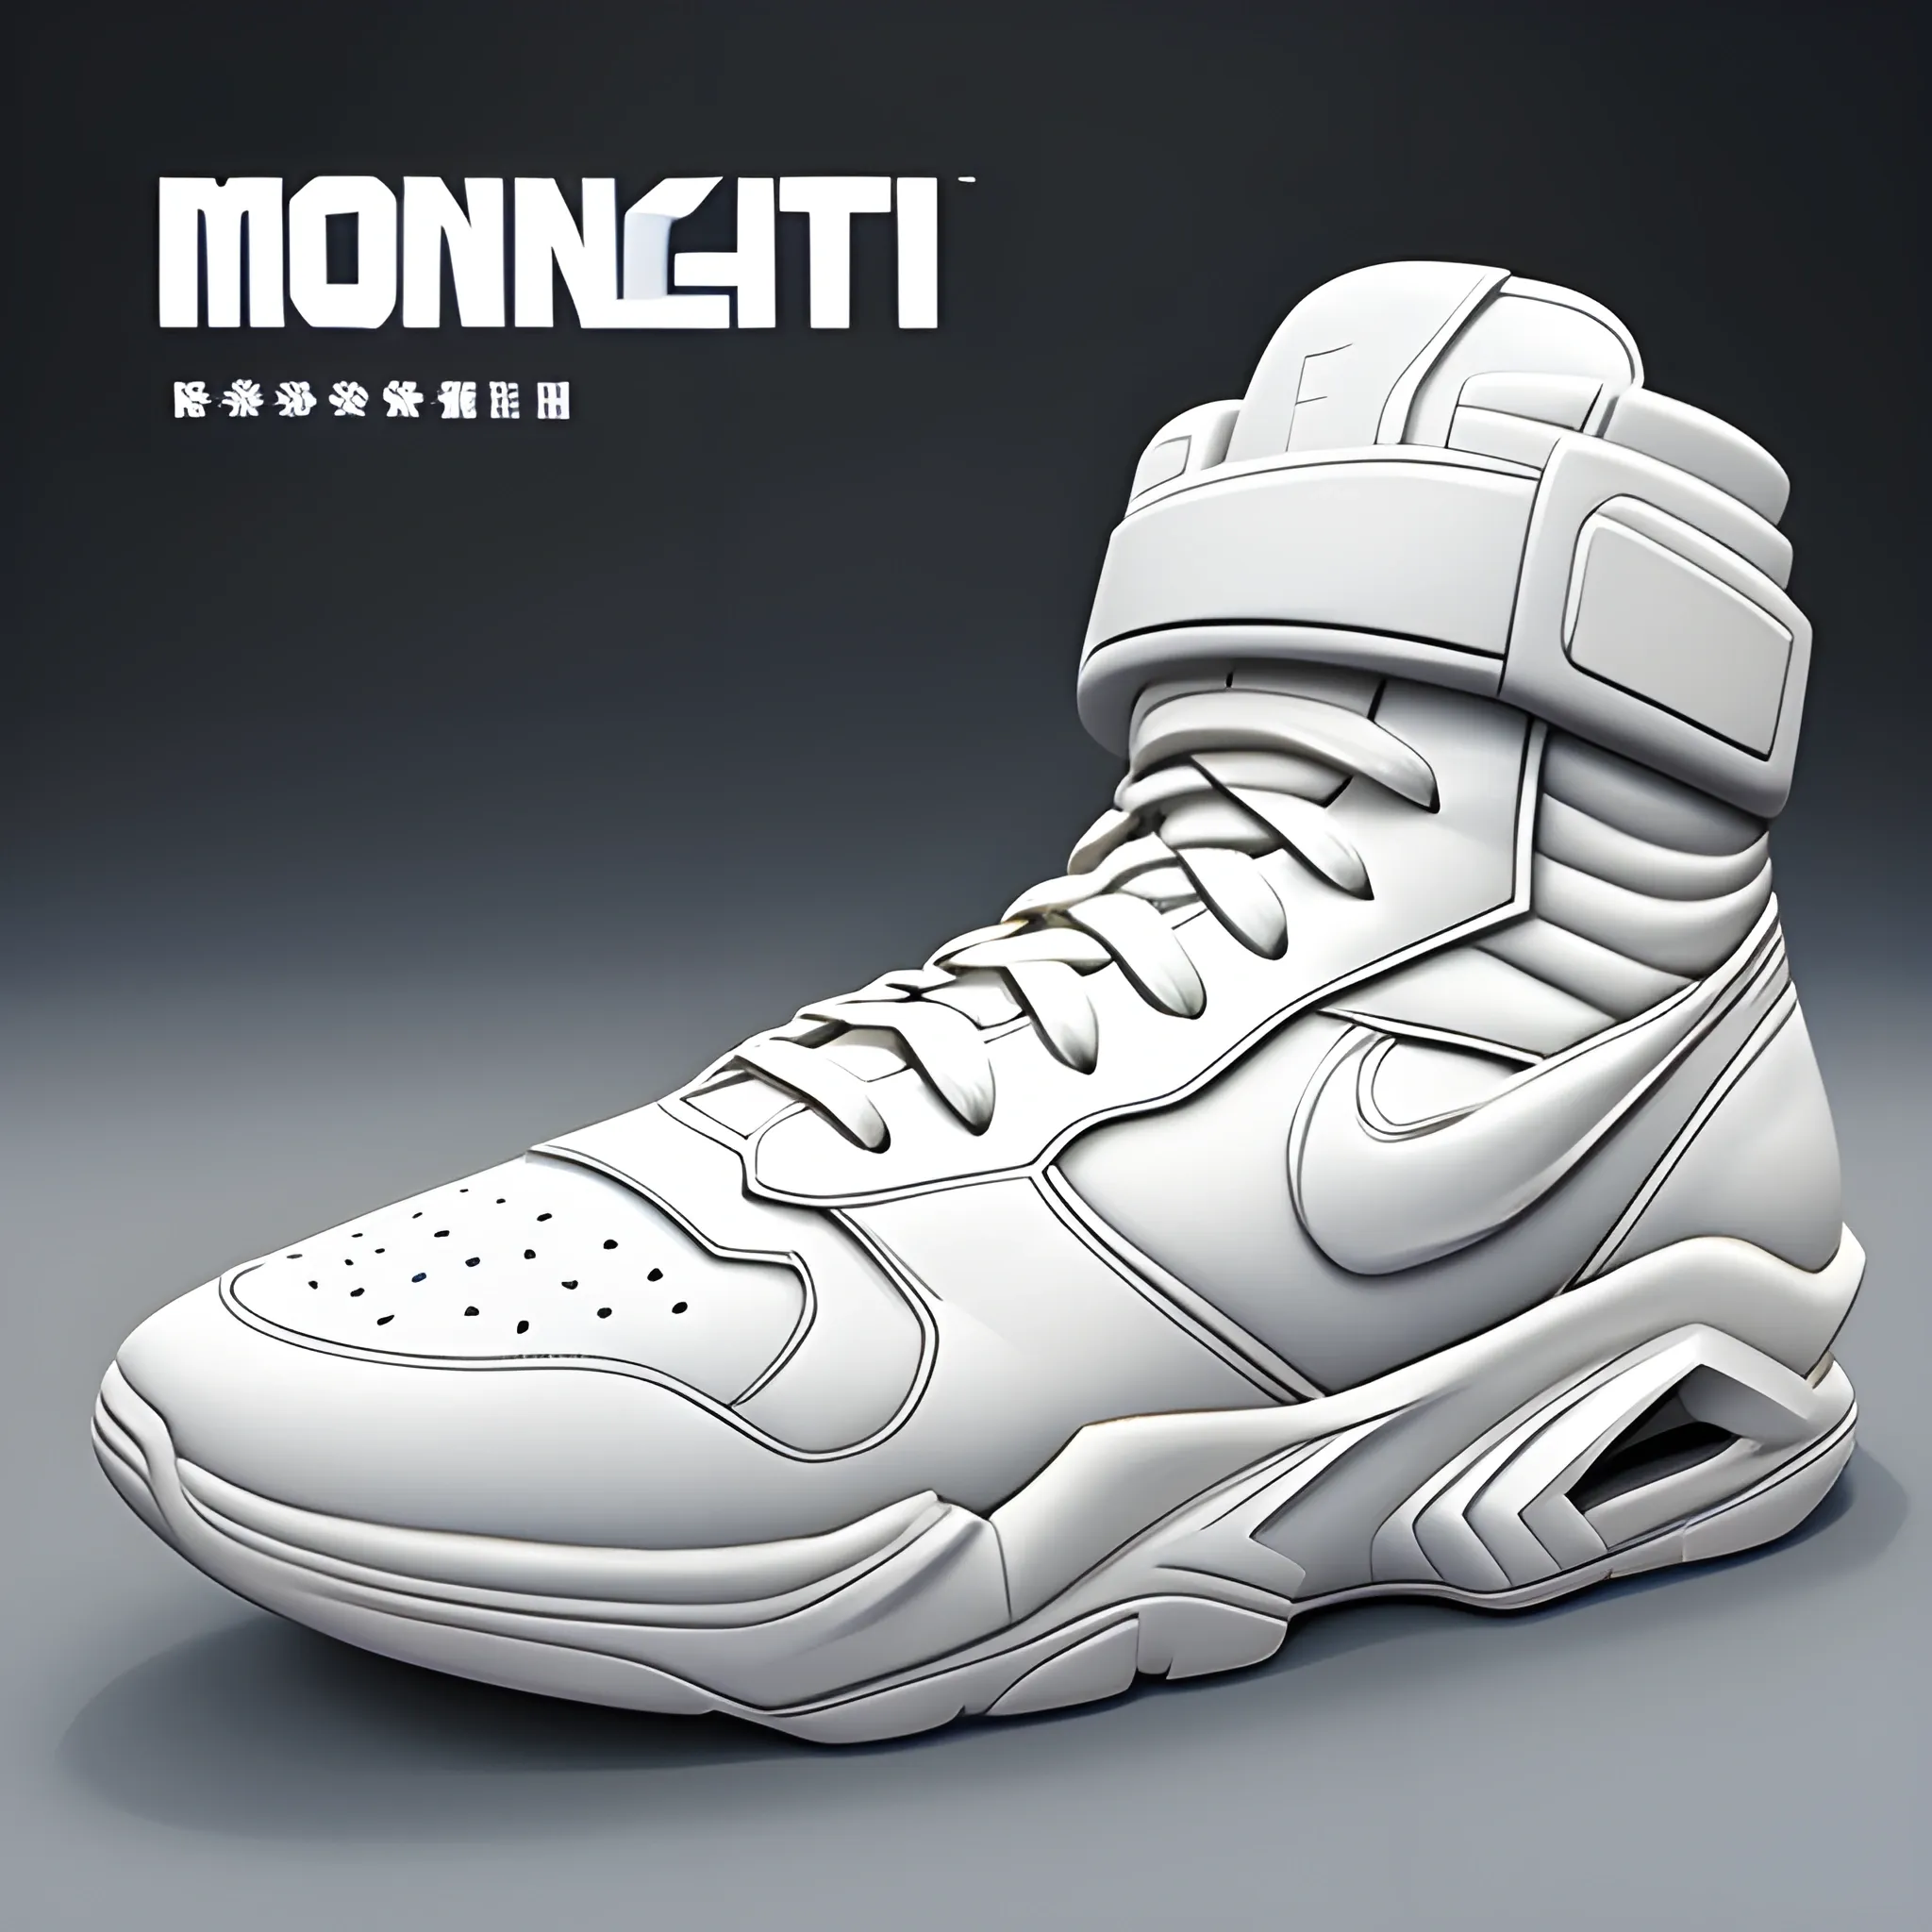 Concept Moon Knight sneakers, popular in art station, soft feeling, bloated, original, pure white, smooth, sharp focus
